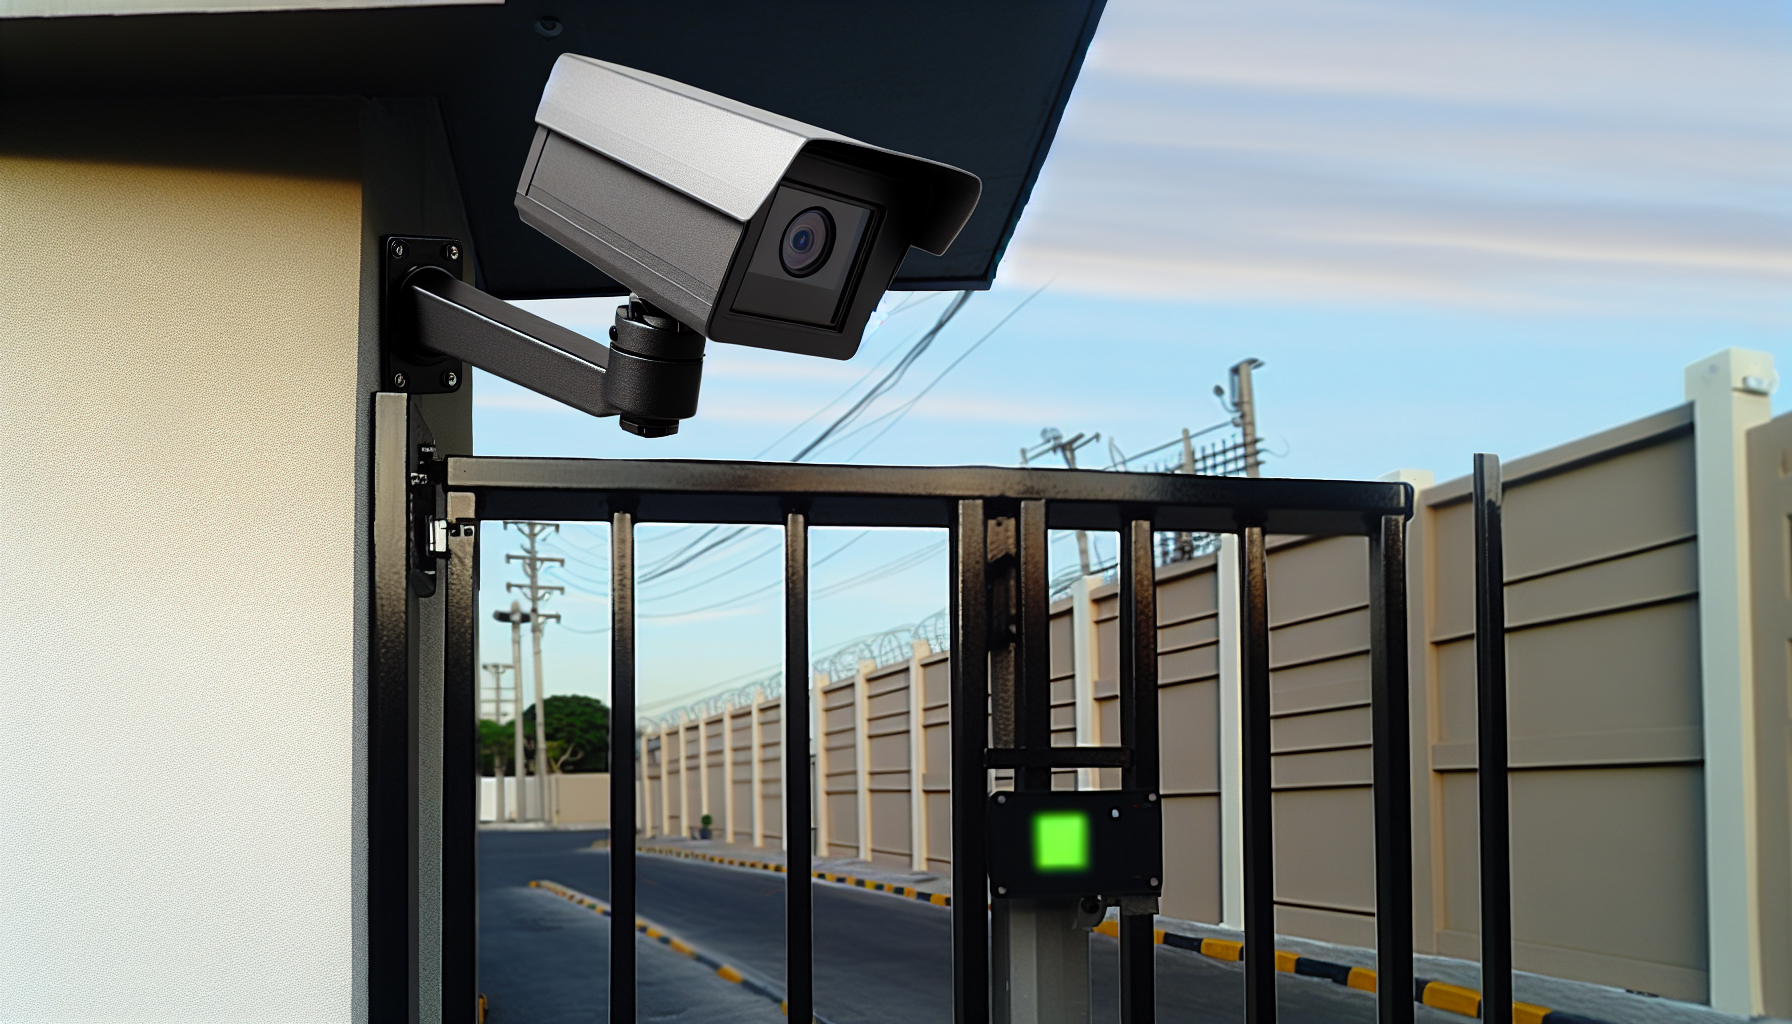 Photo of a license plate recognition camera system